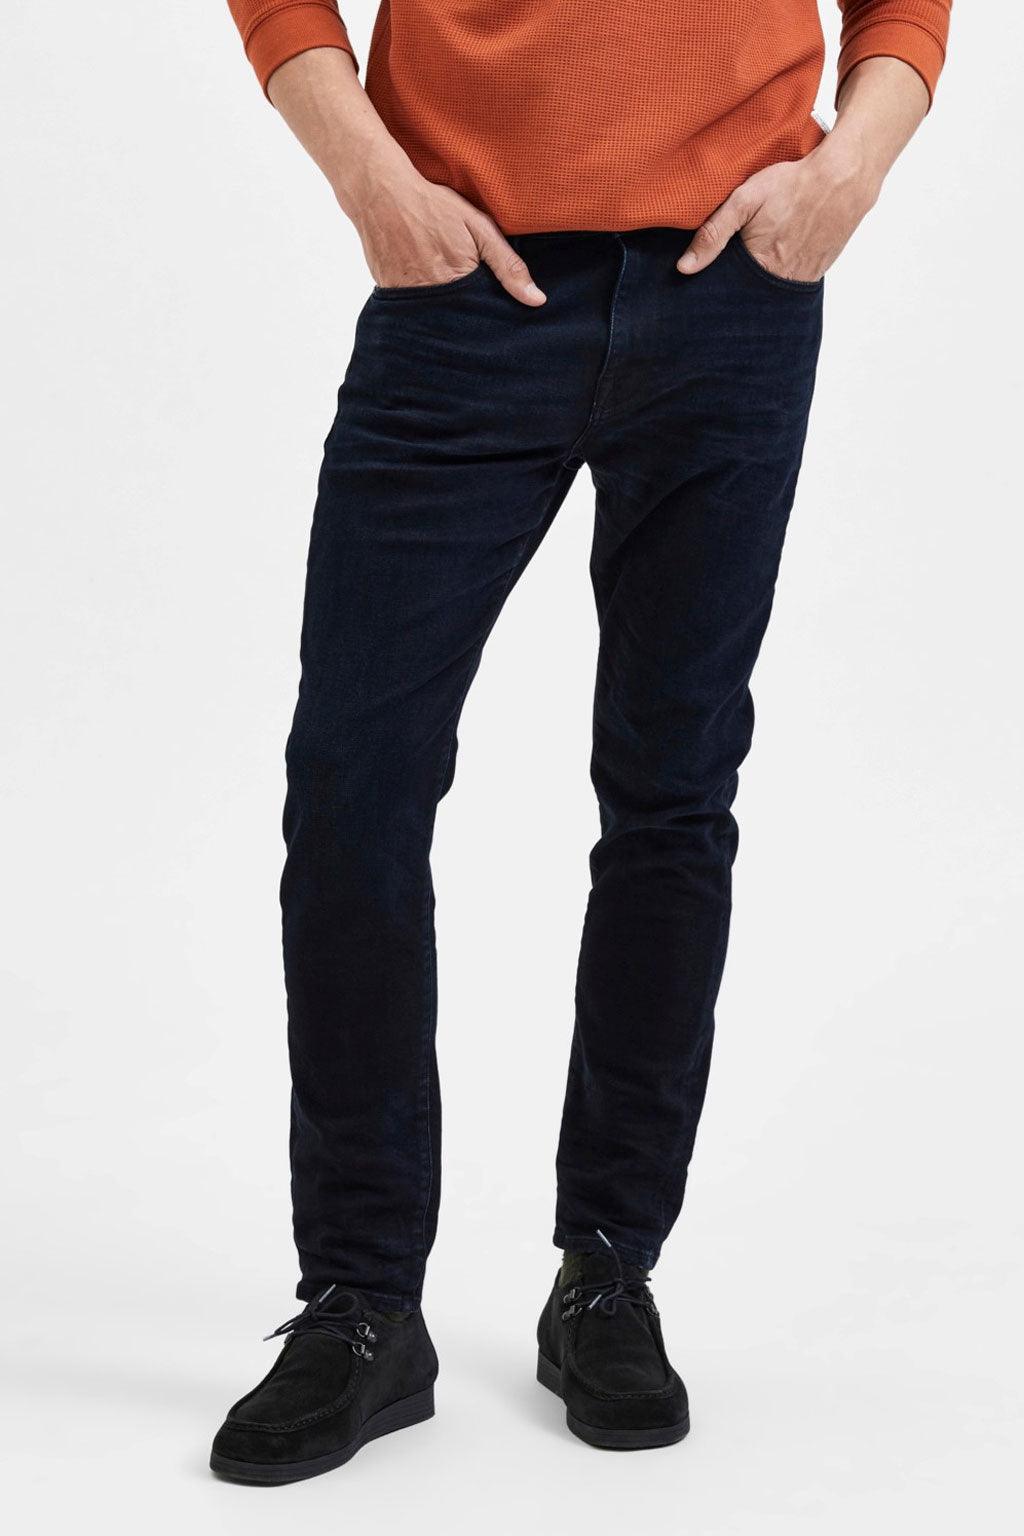 Selected jeans | Big Boss | the menswear concept